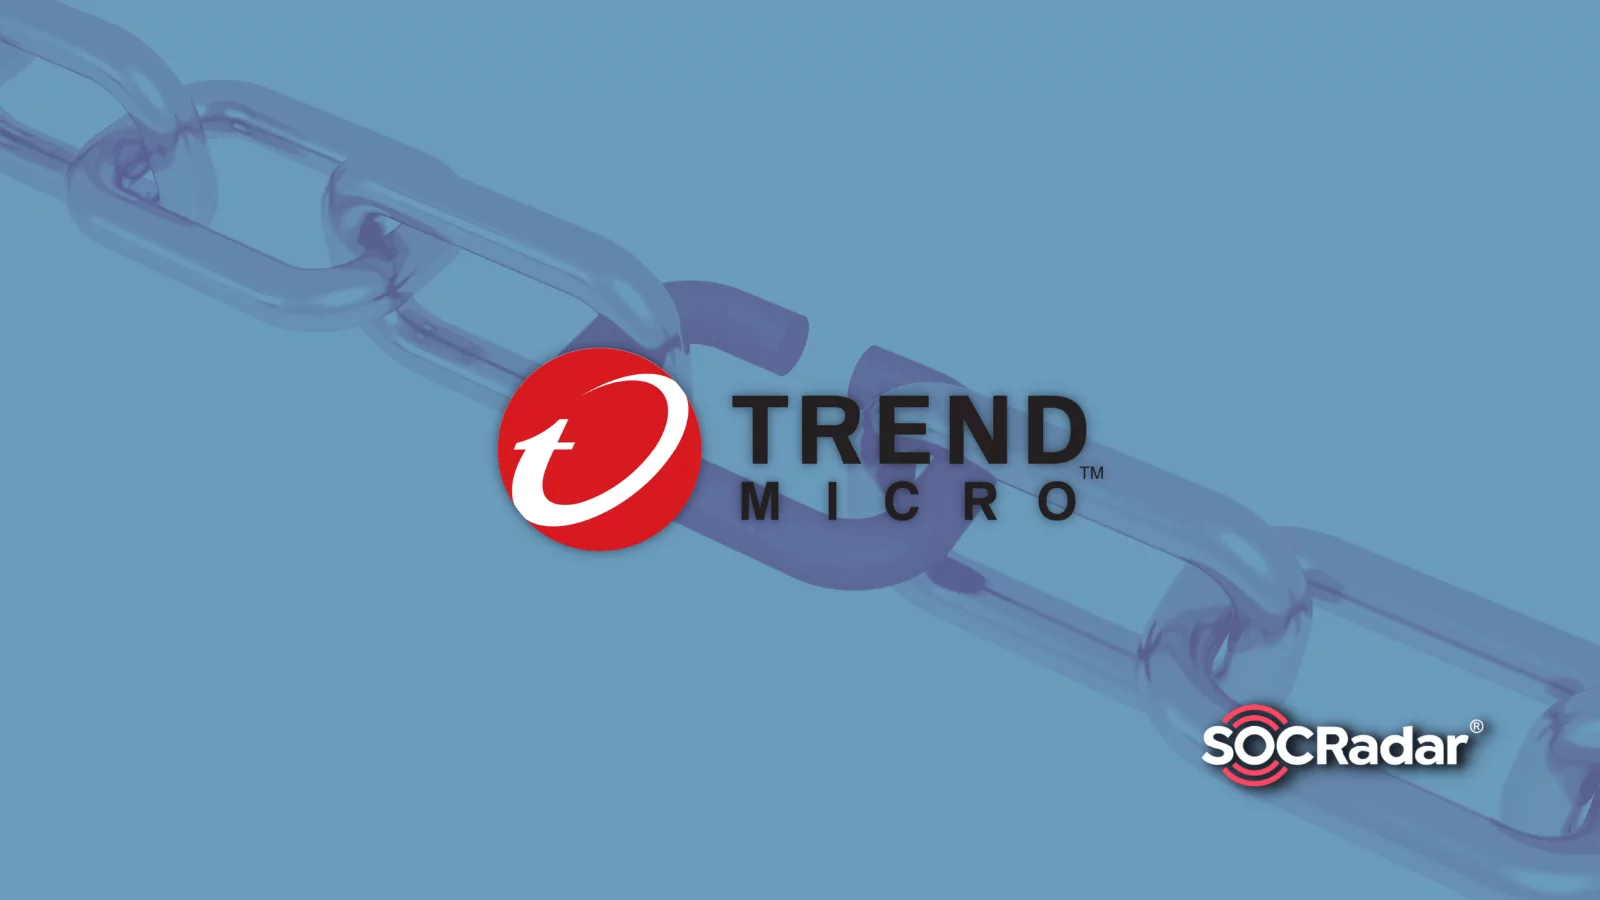 SOCRadar® Cyber Intelligence Inc. | Trend Micro Warnes for Actively Exploited RCE Flaw in Apex One